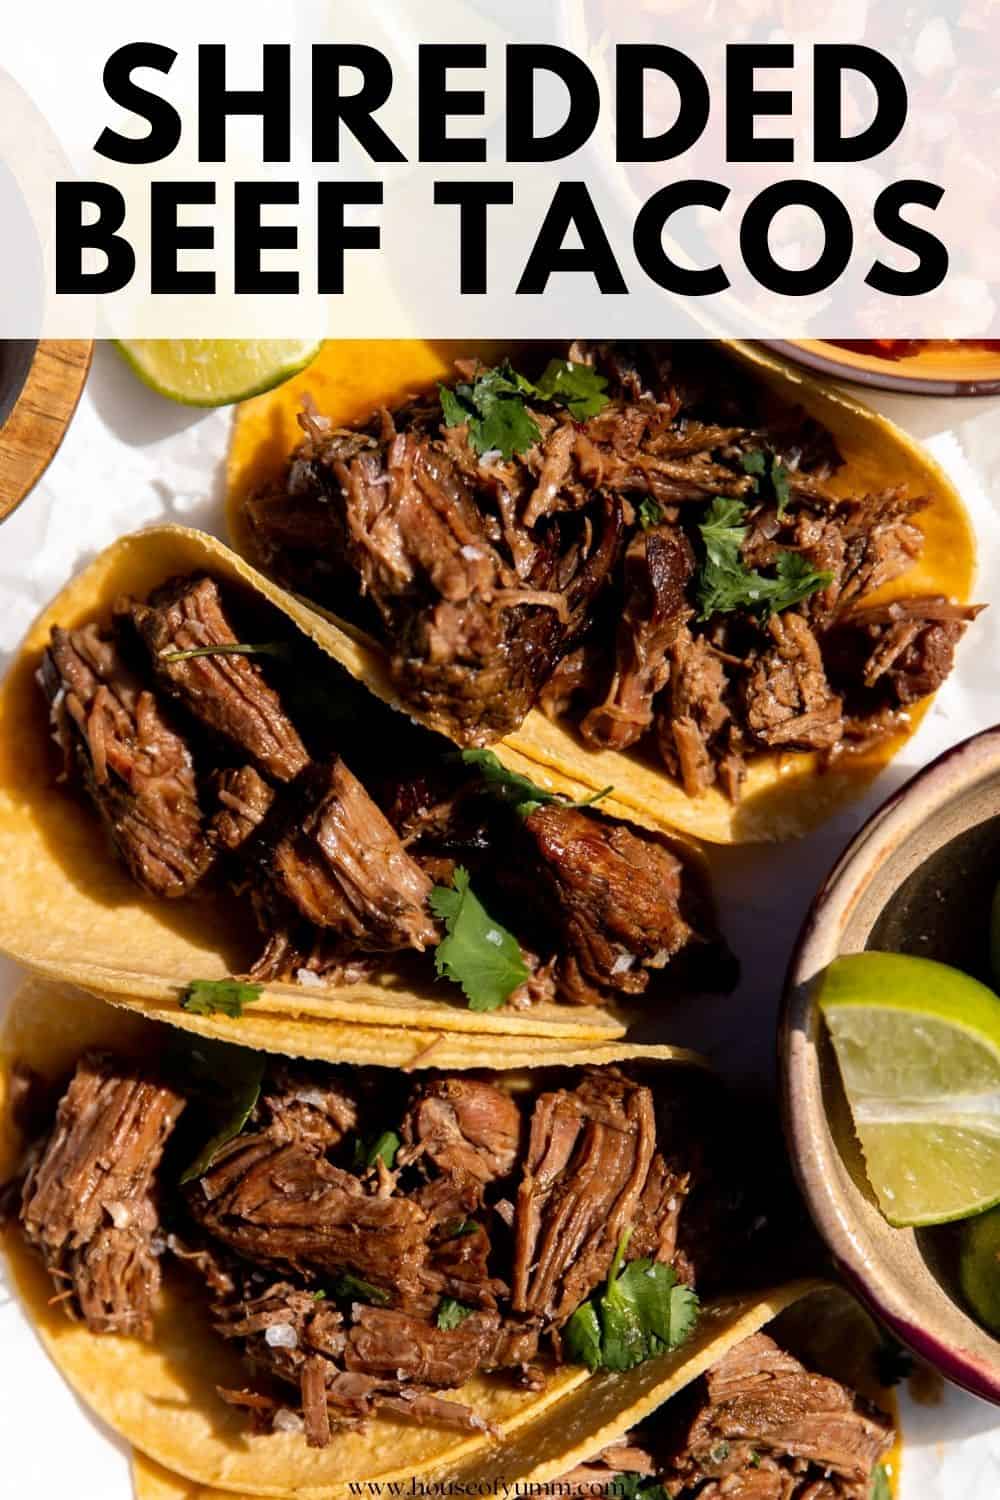 Shredded Beef tacos with text.